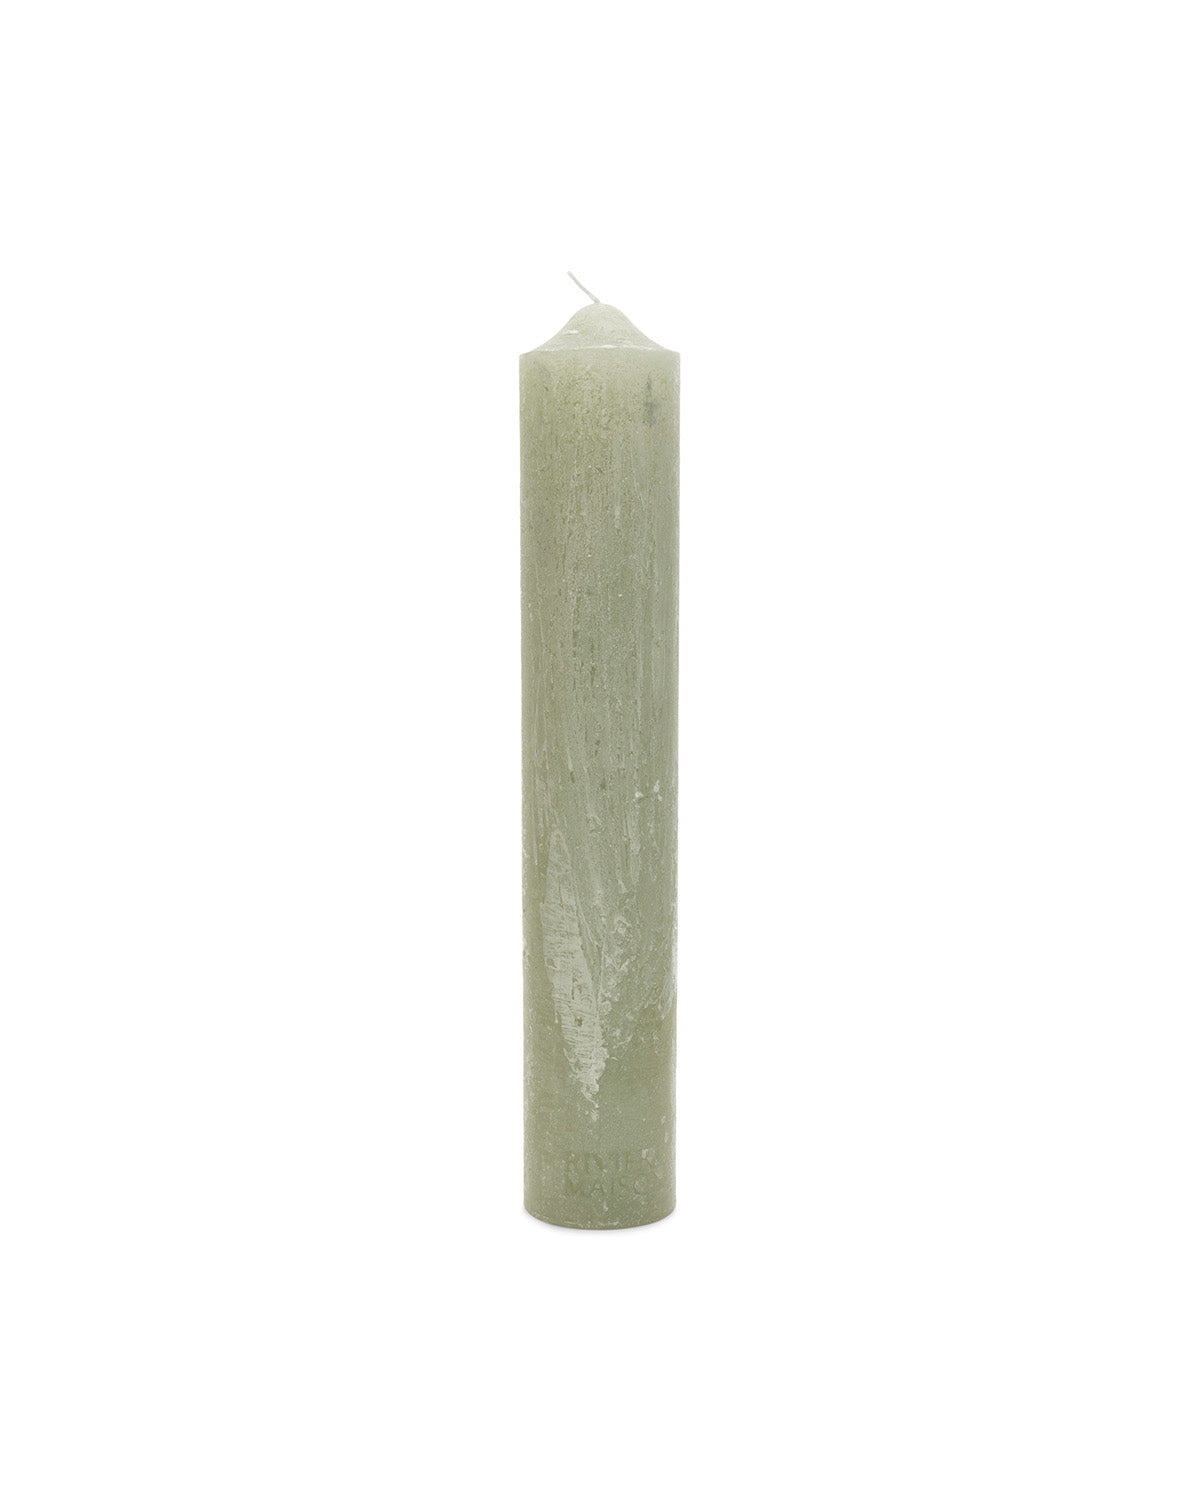 CANDLE in color mint GREEN made by Riviera Maison